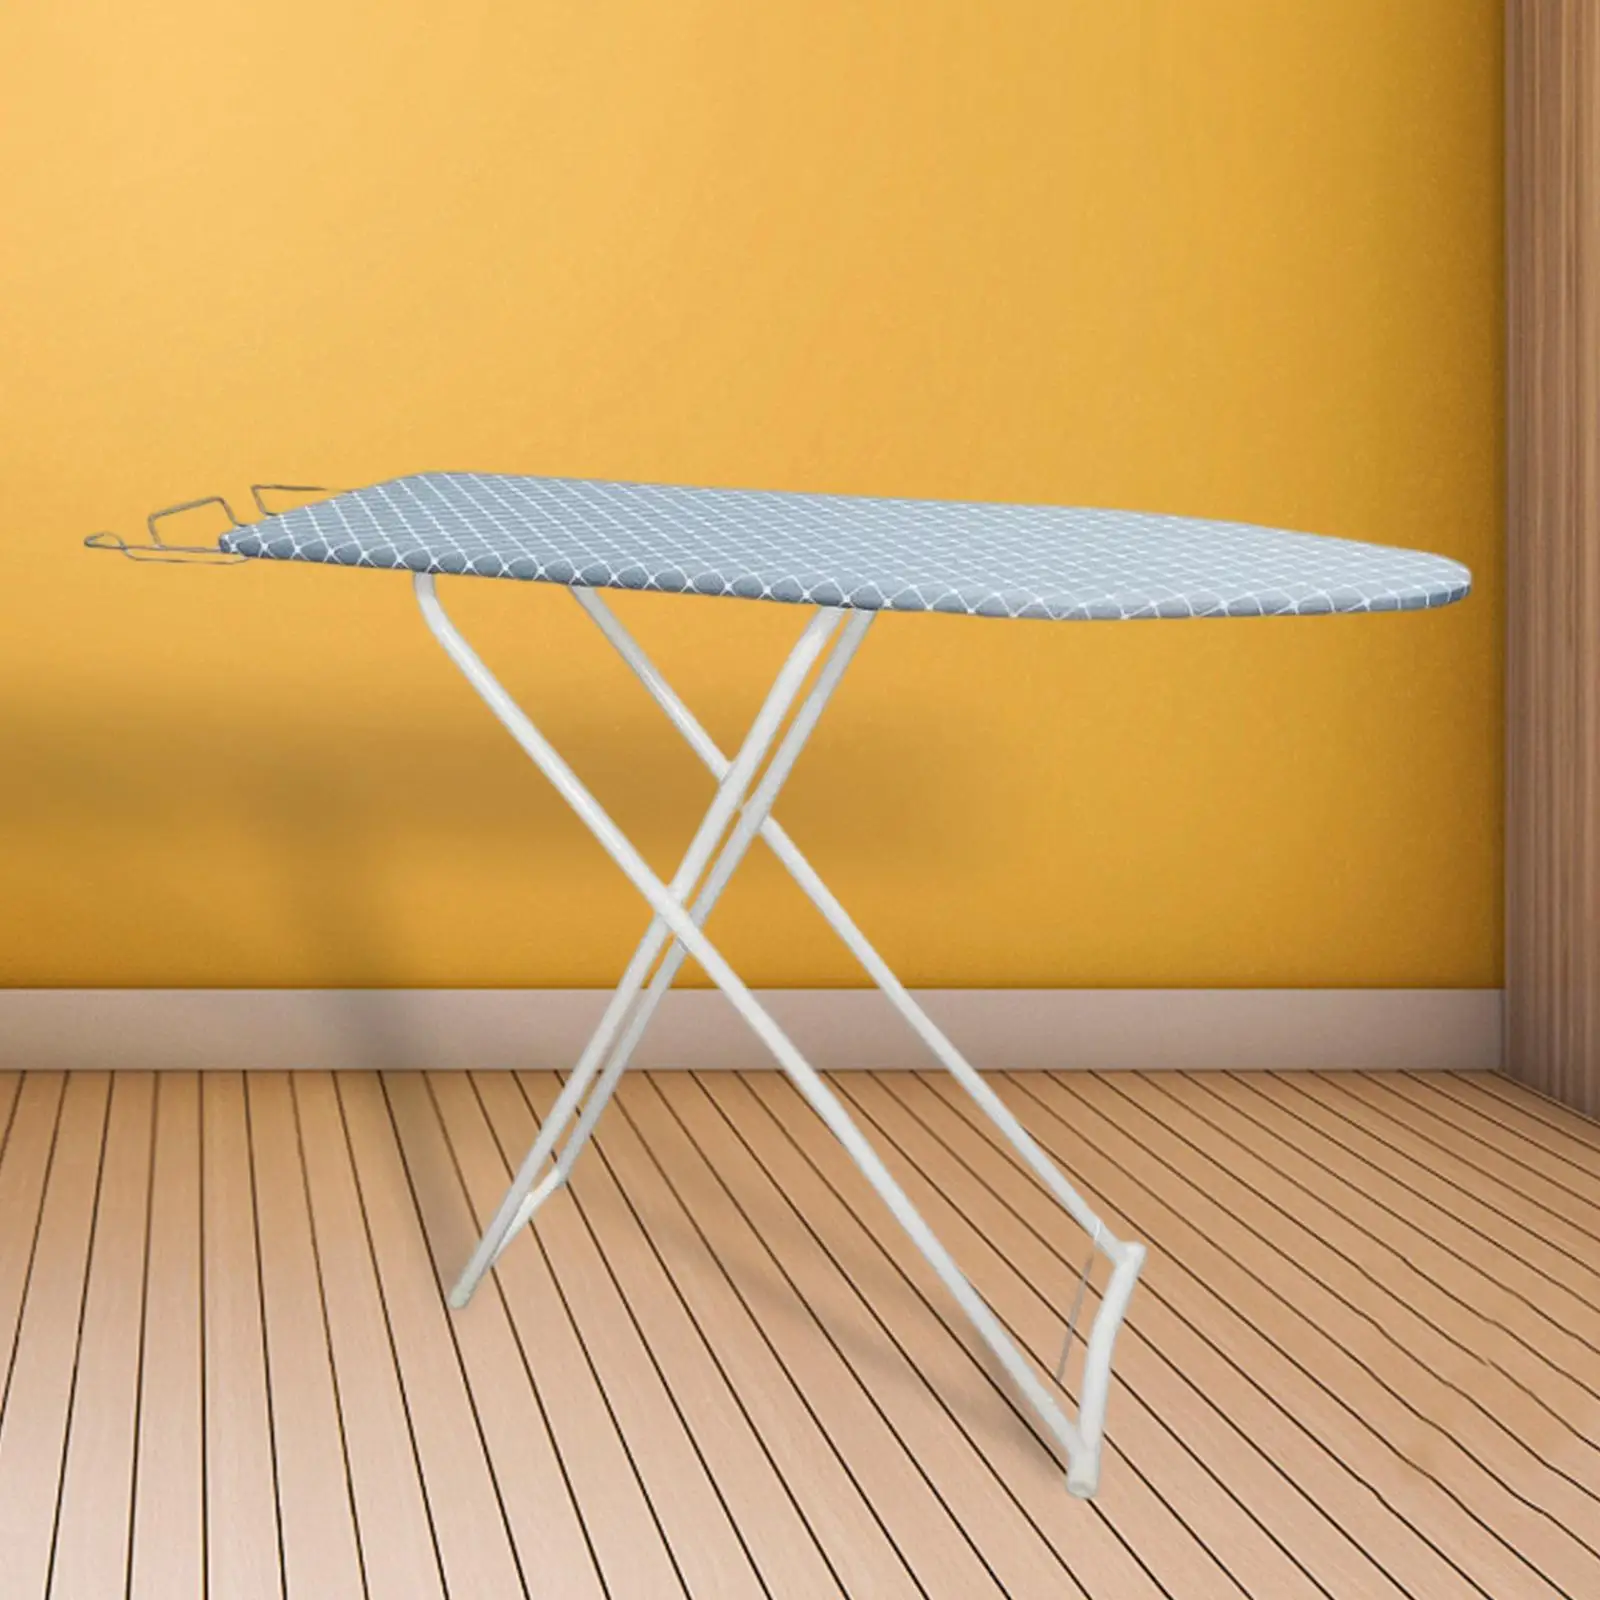 Tabletop Ironing Board with Folding Legs Portable Folding Mini Iron Board for Countertop Dorm